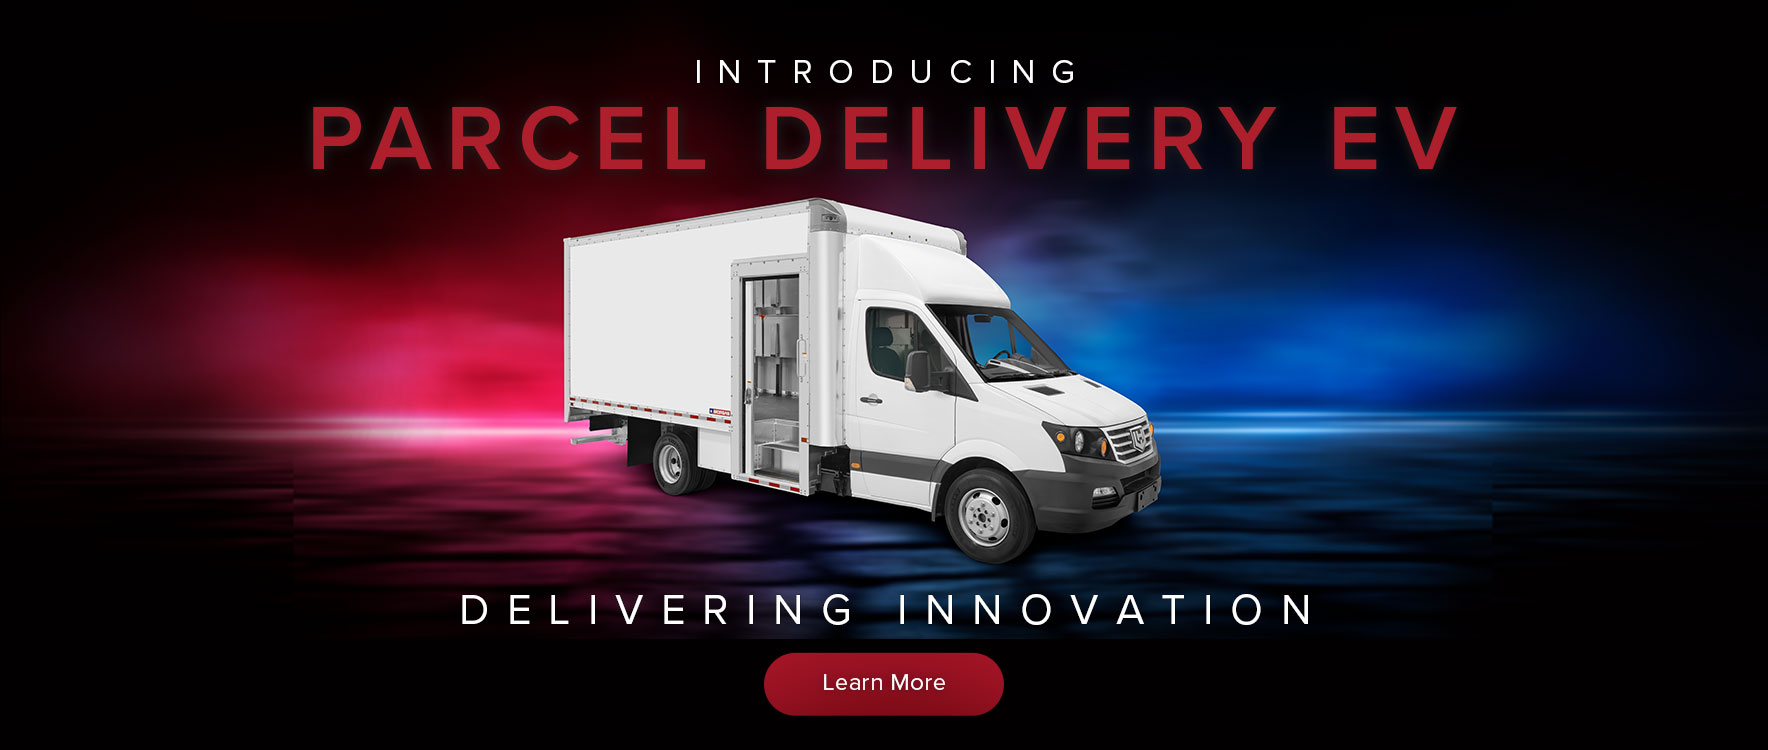 Parcel Electric Delivery Vehicle